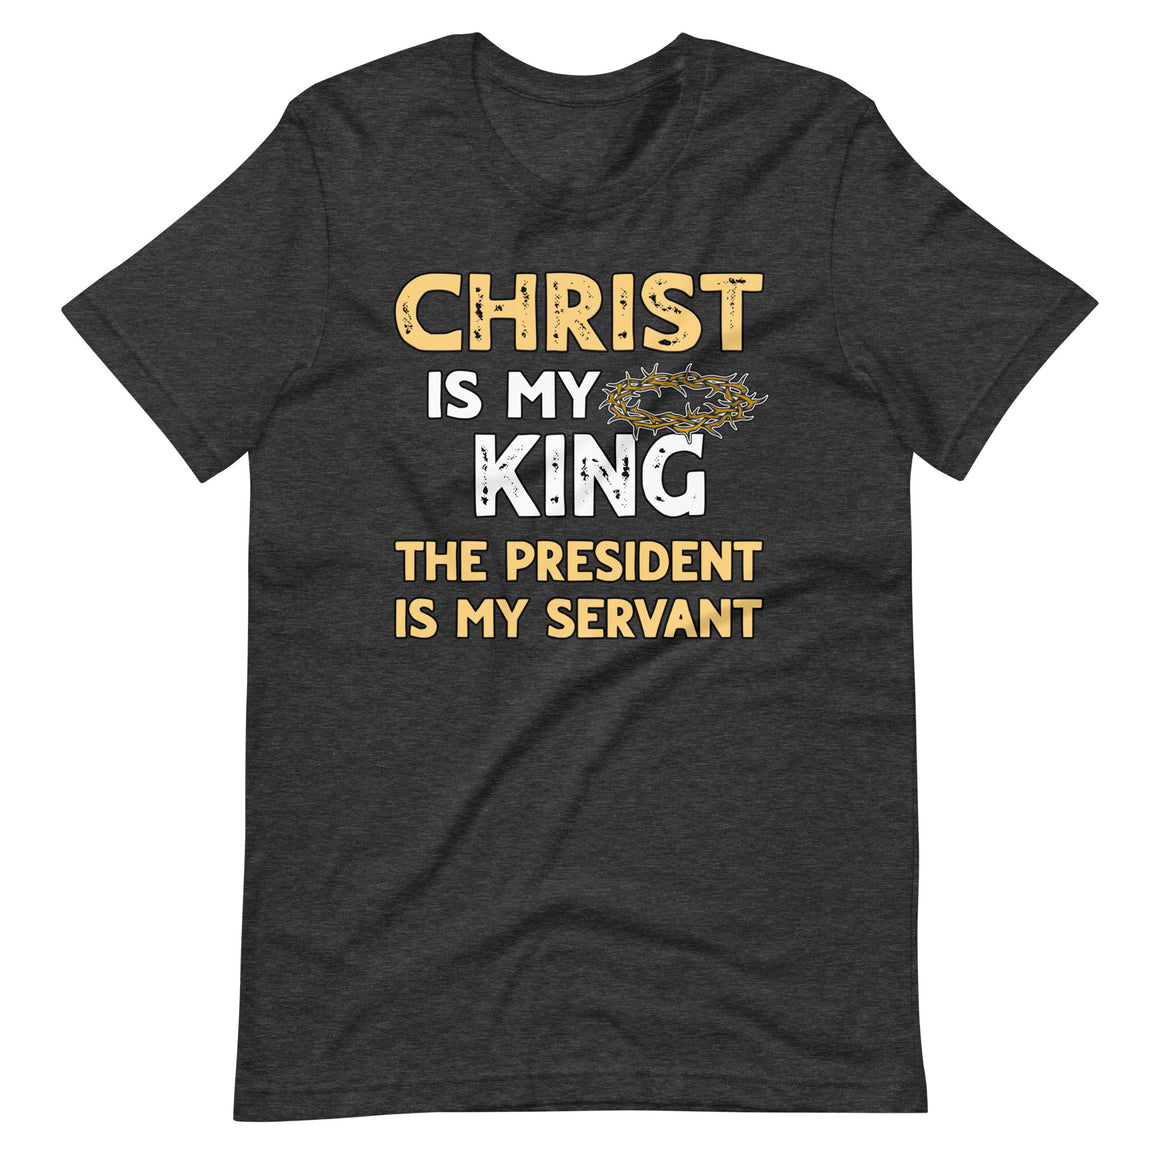 Christ is My King The President is My Servant Shirt by Libertarian Country